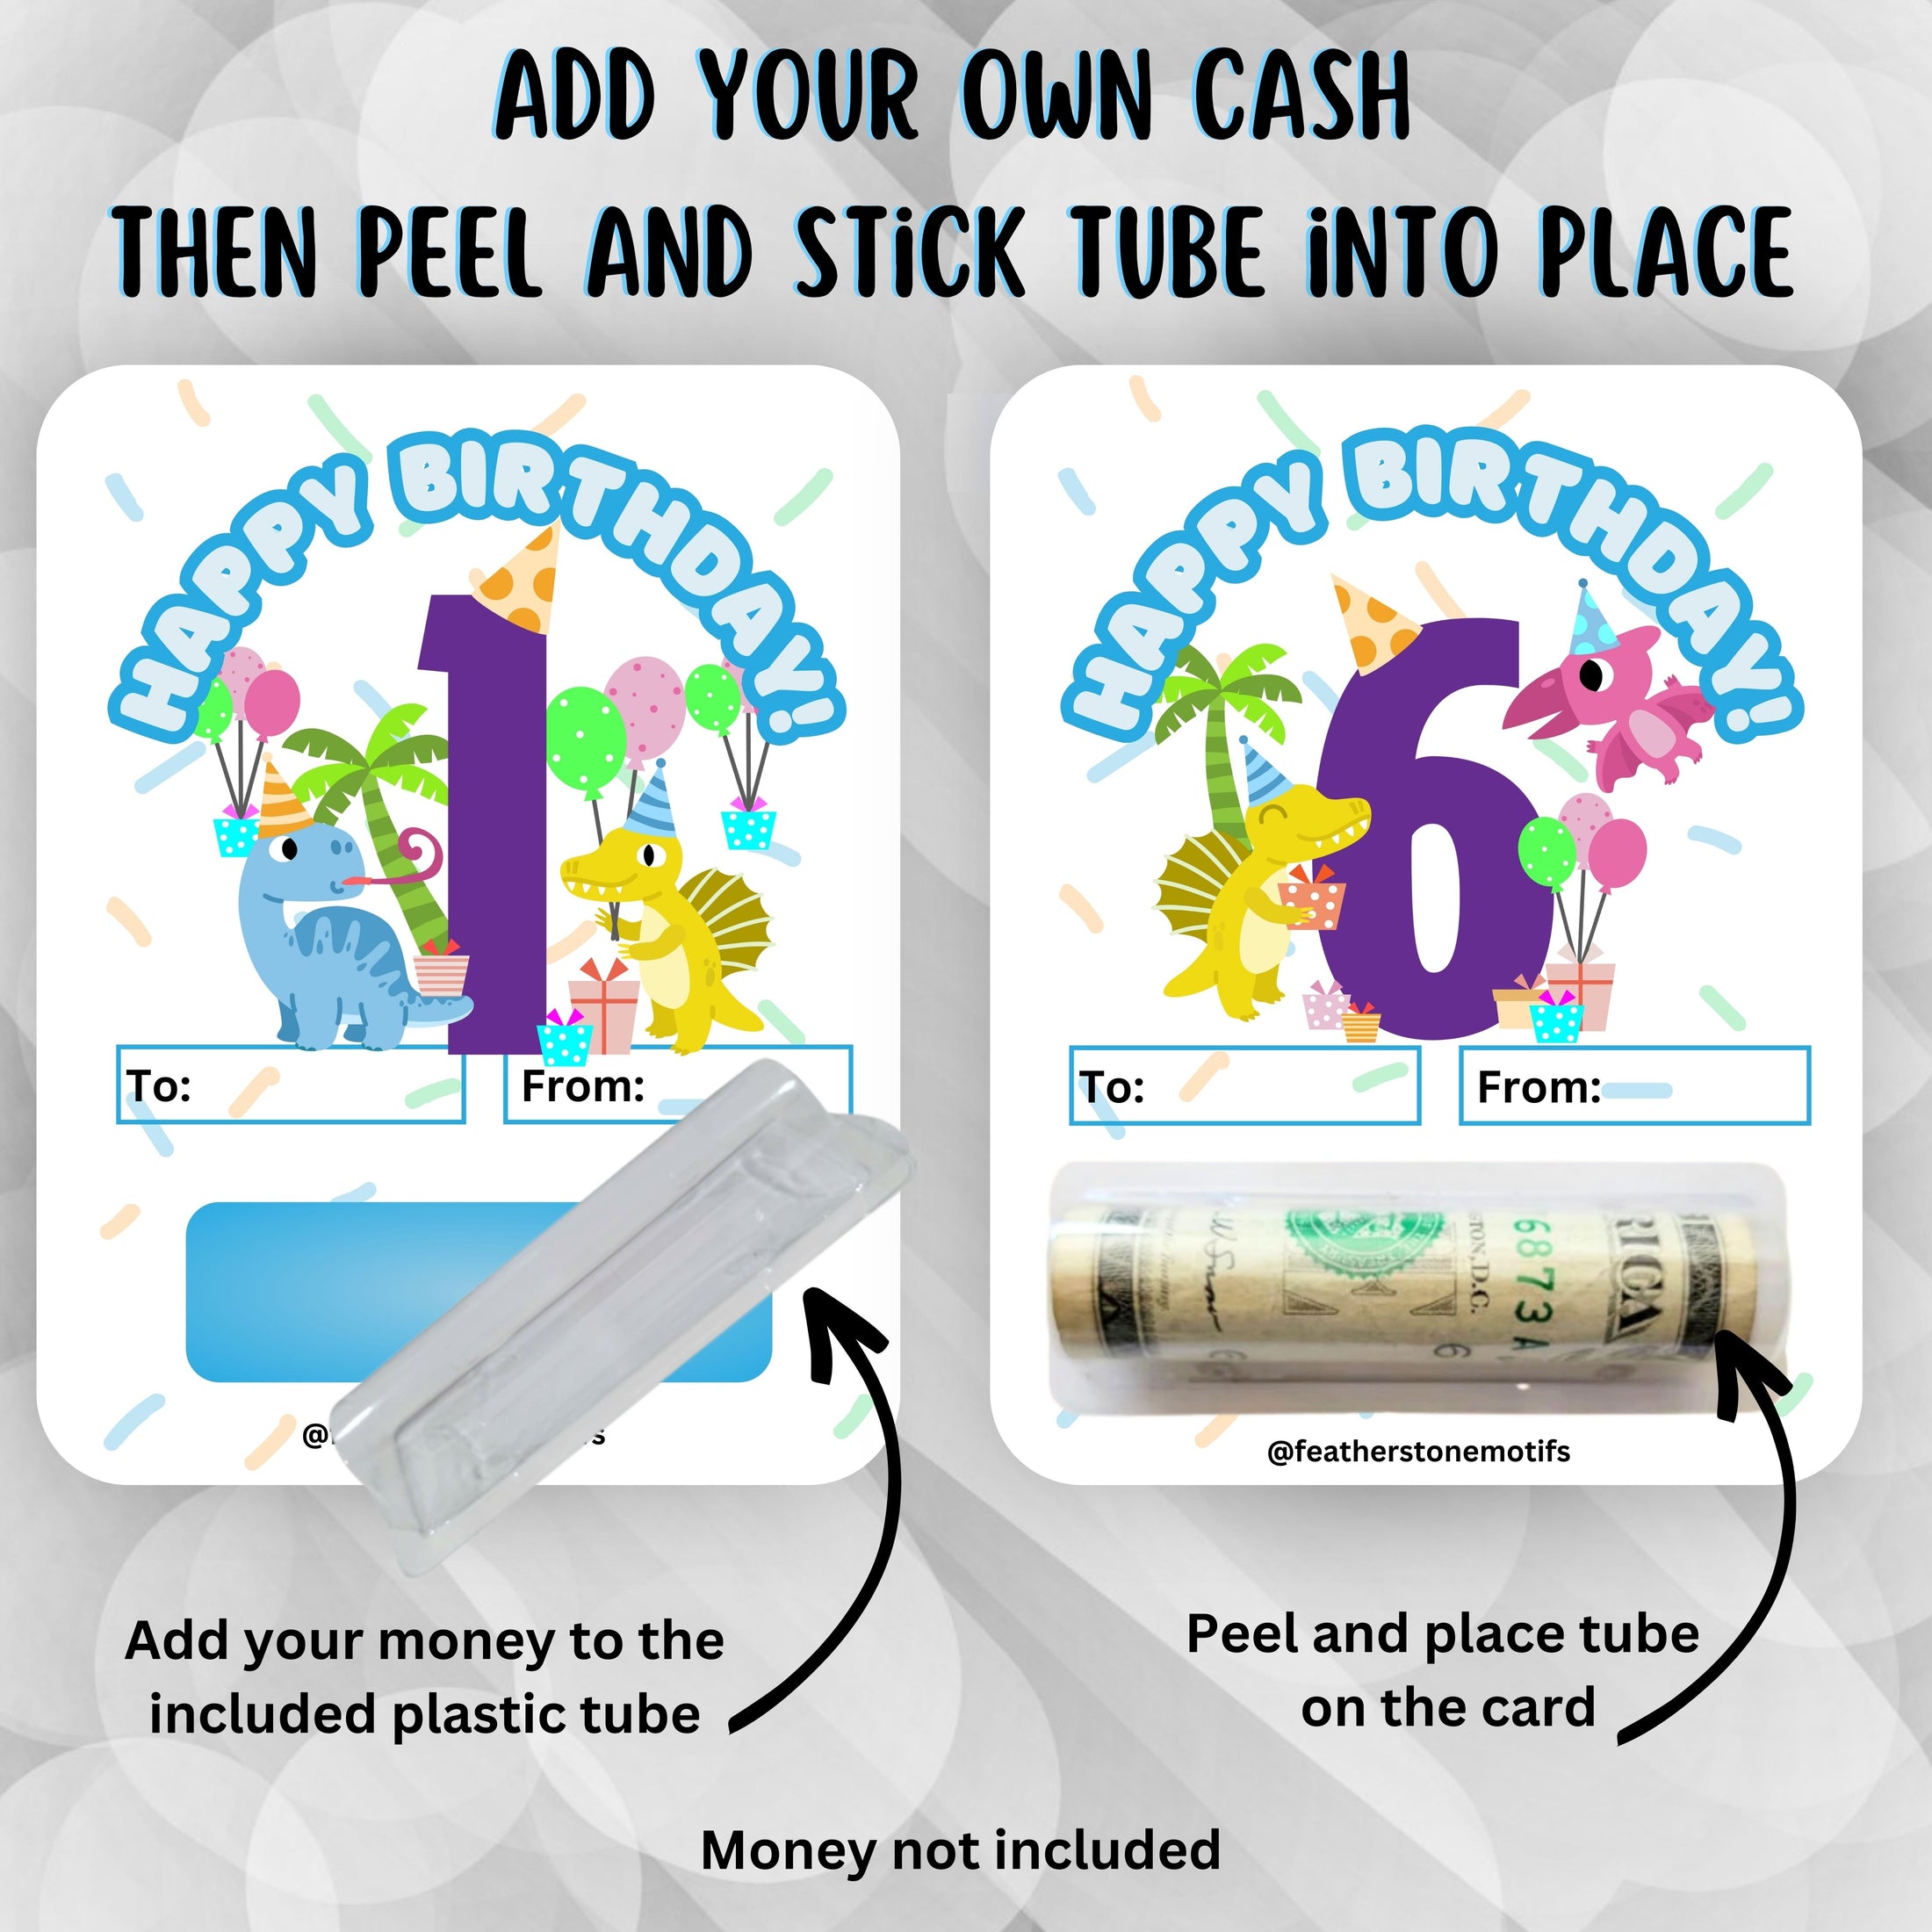 This image shows how to attach the money tube to the Dino Birthday Money Card.